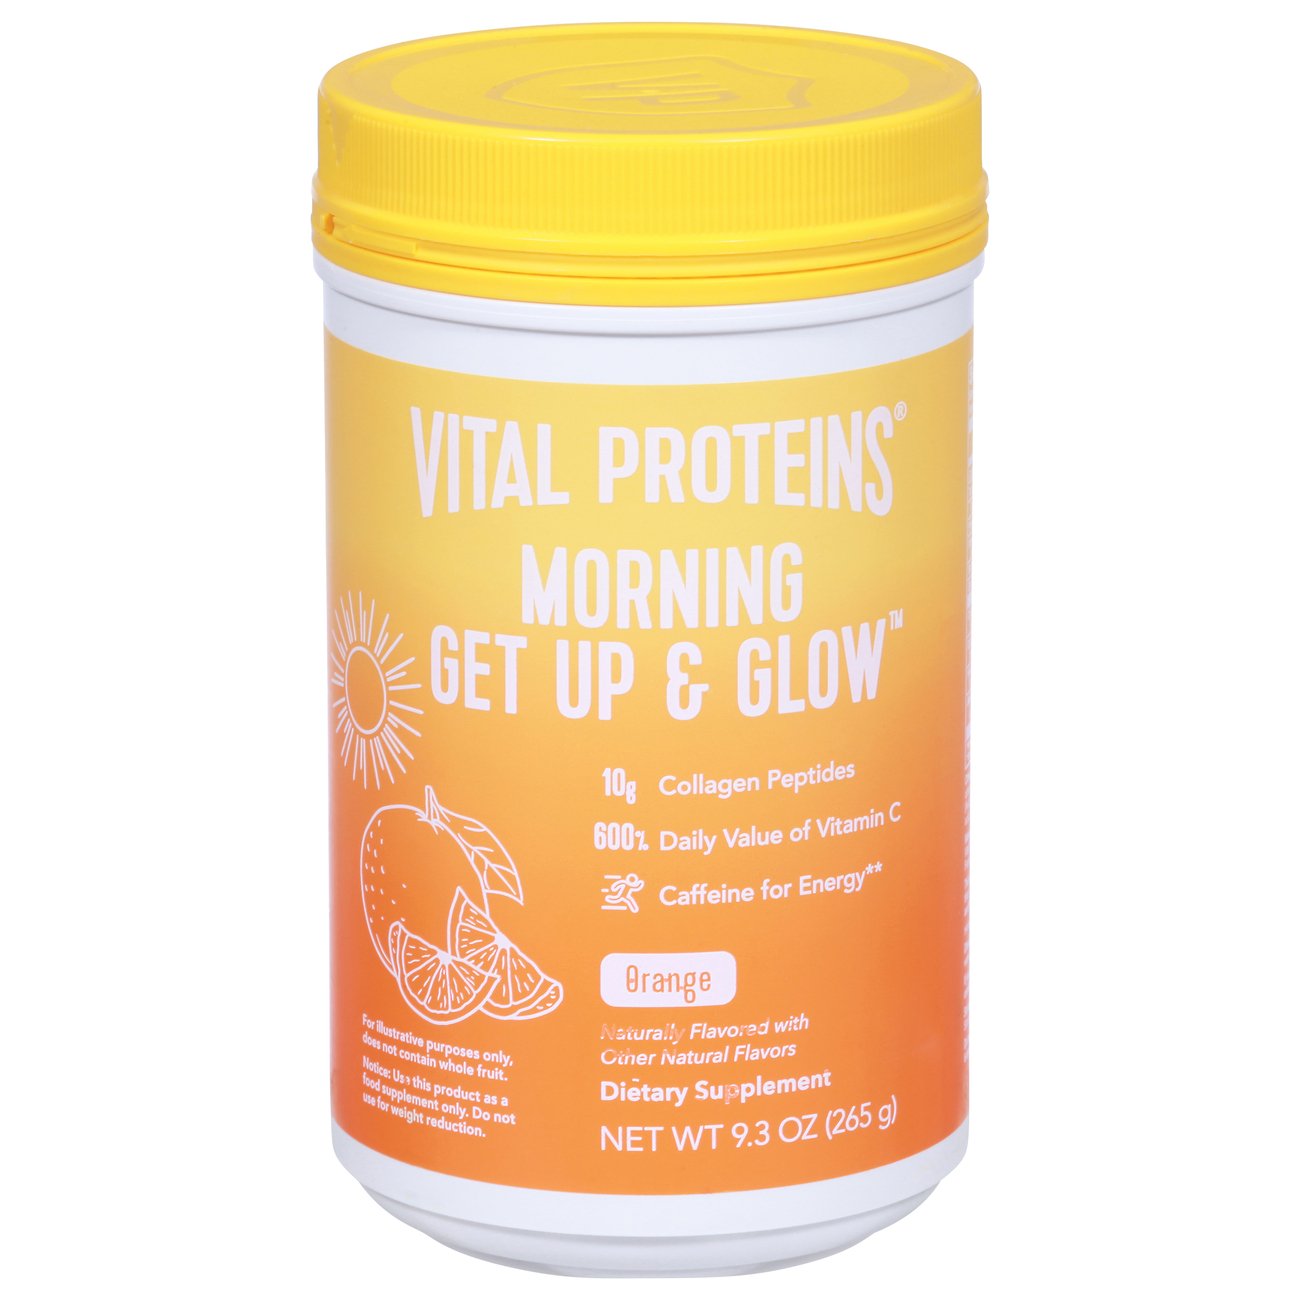 Vital Proteins Morning Get Up And Glow Powder Orange Shop Herbs And Homeopathy At H E B